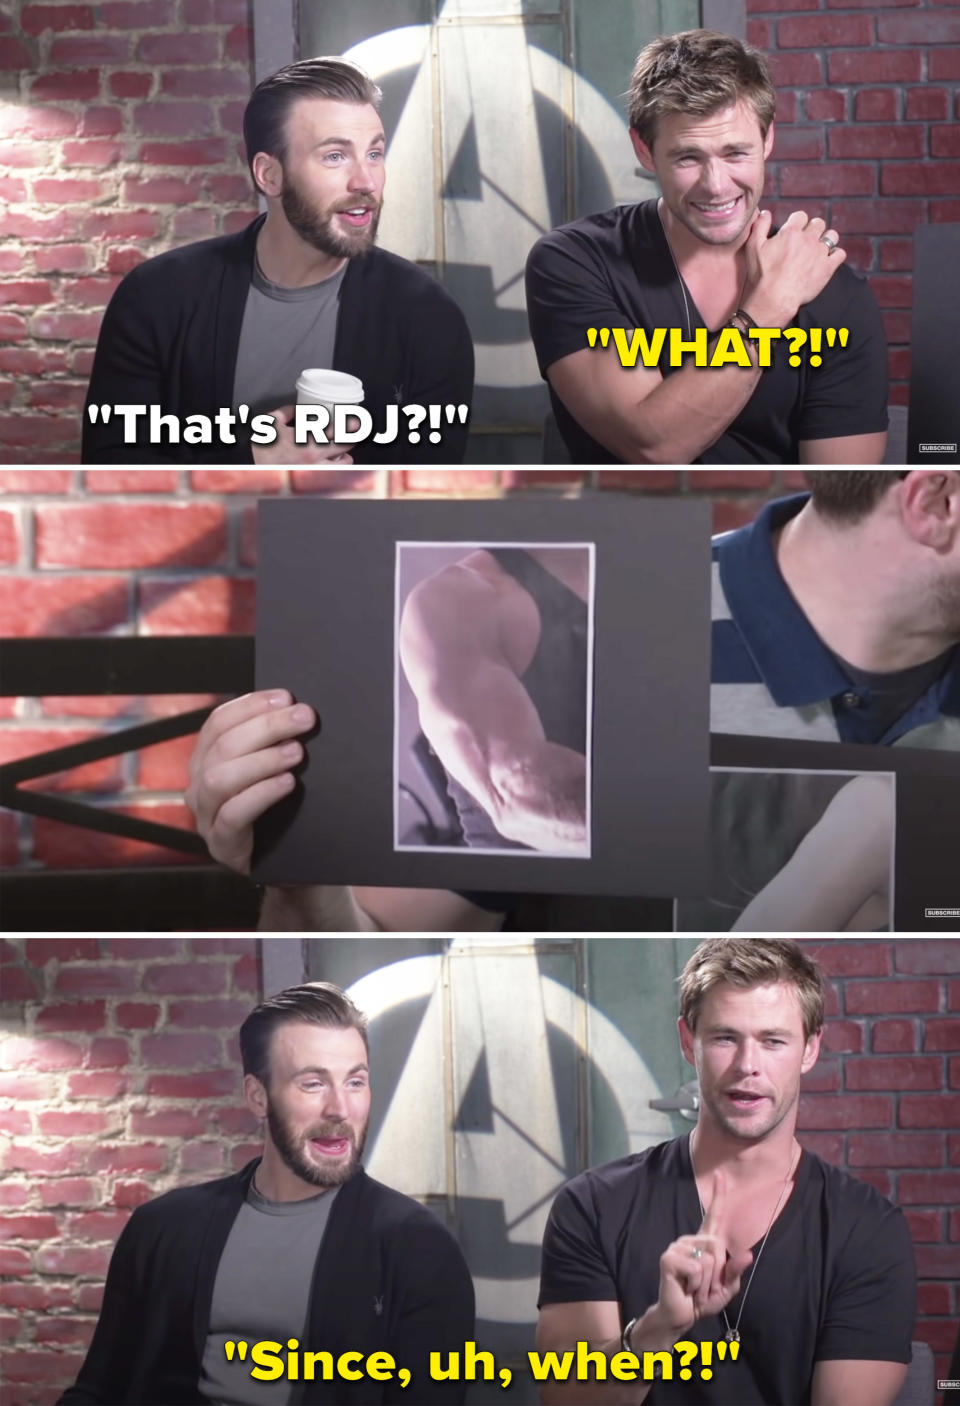 Chris Hemsworth saying, "Since, uh, when" after being shown RDJ's bicep